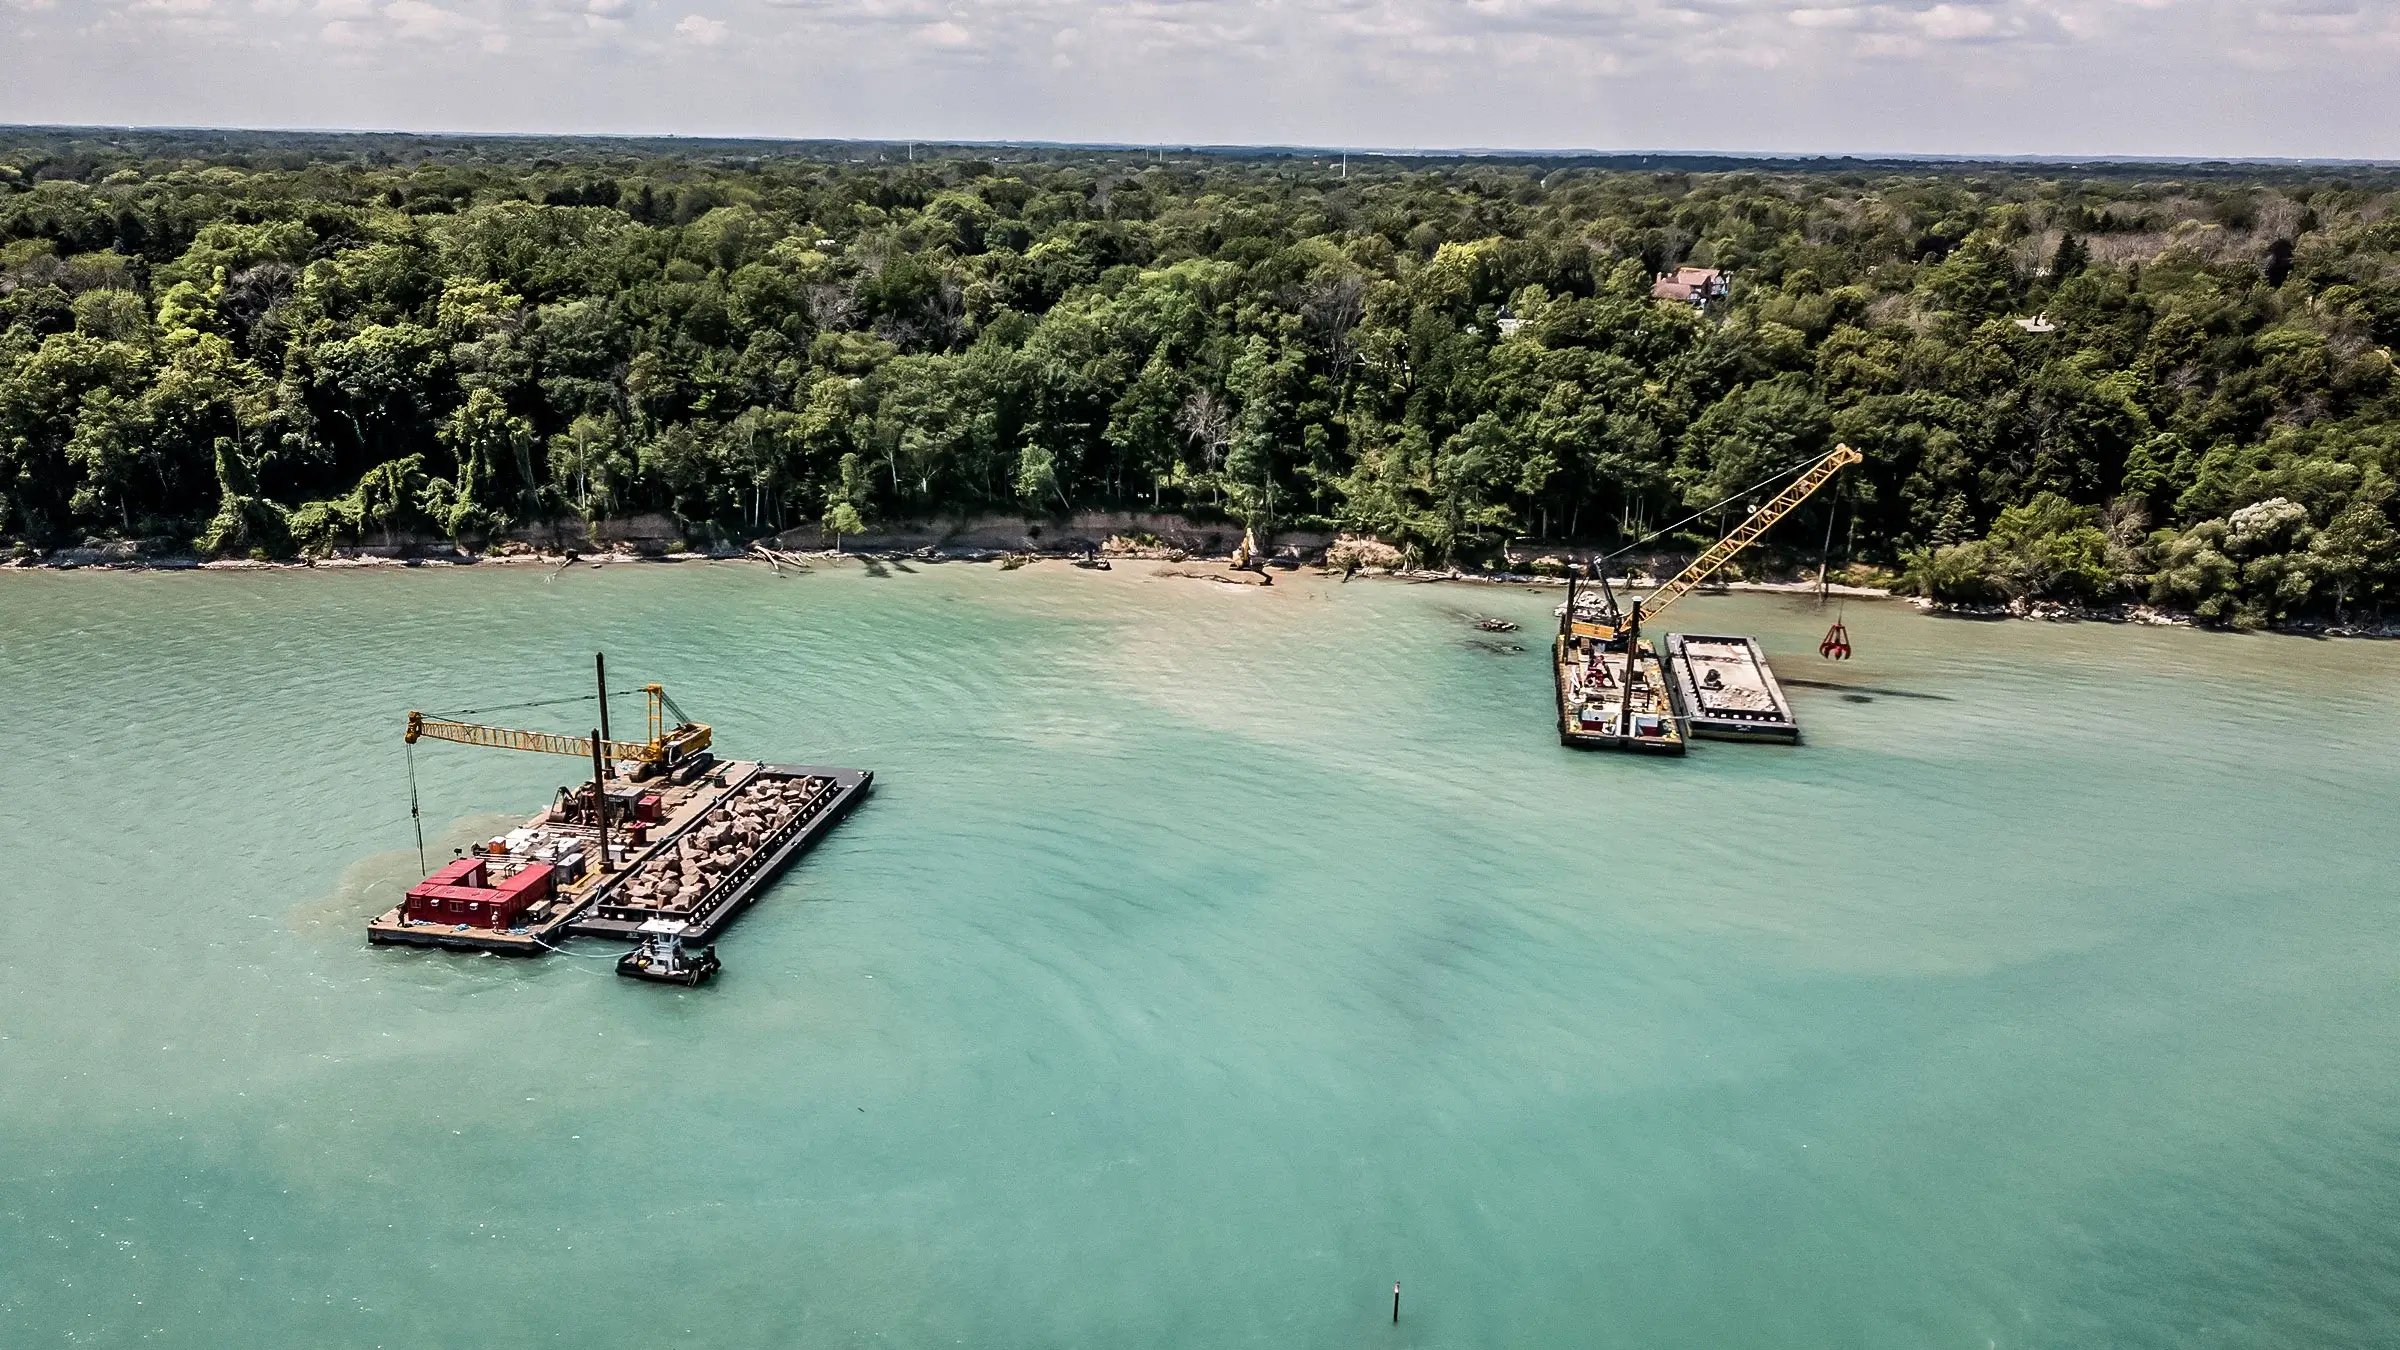 Two barges with cranes operate off-shore near the Lake Michigan coast line